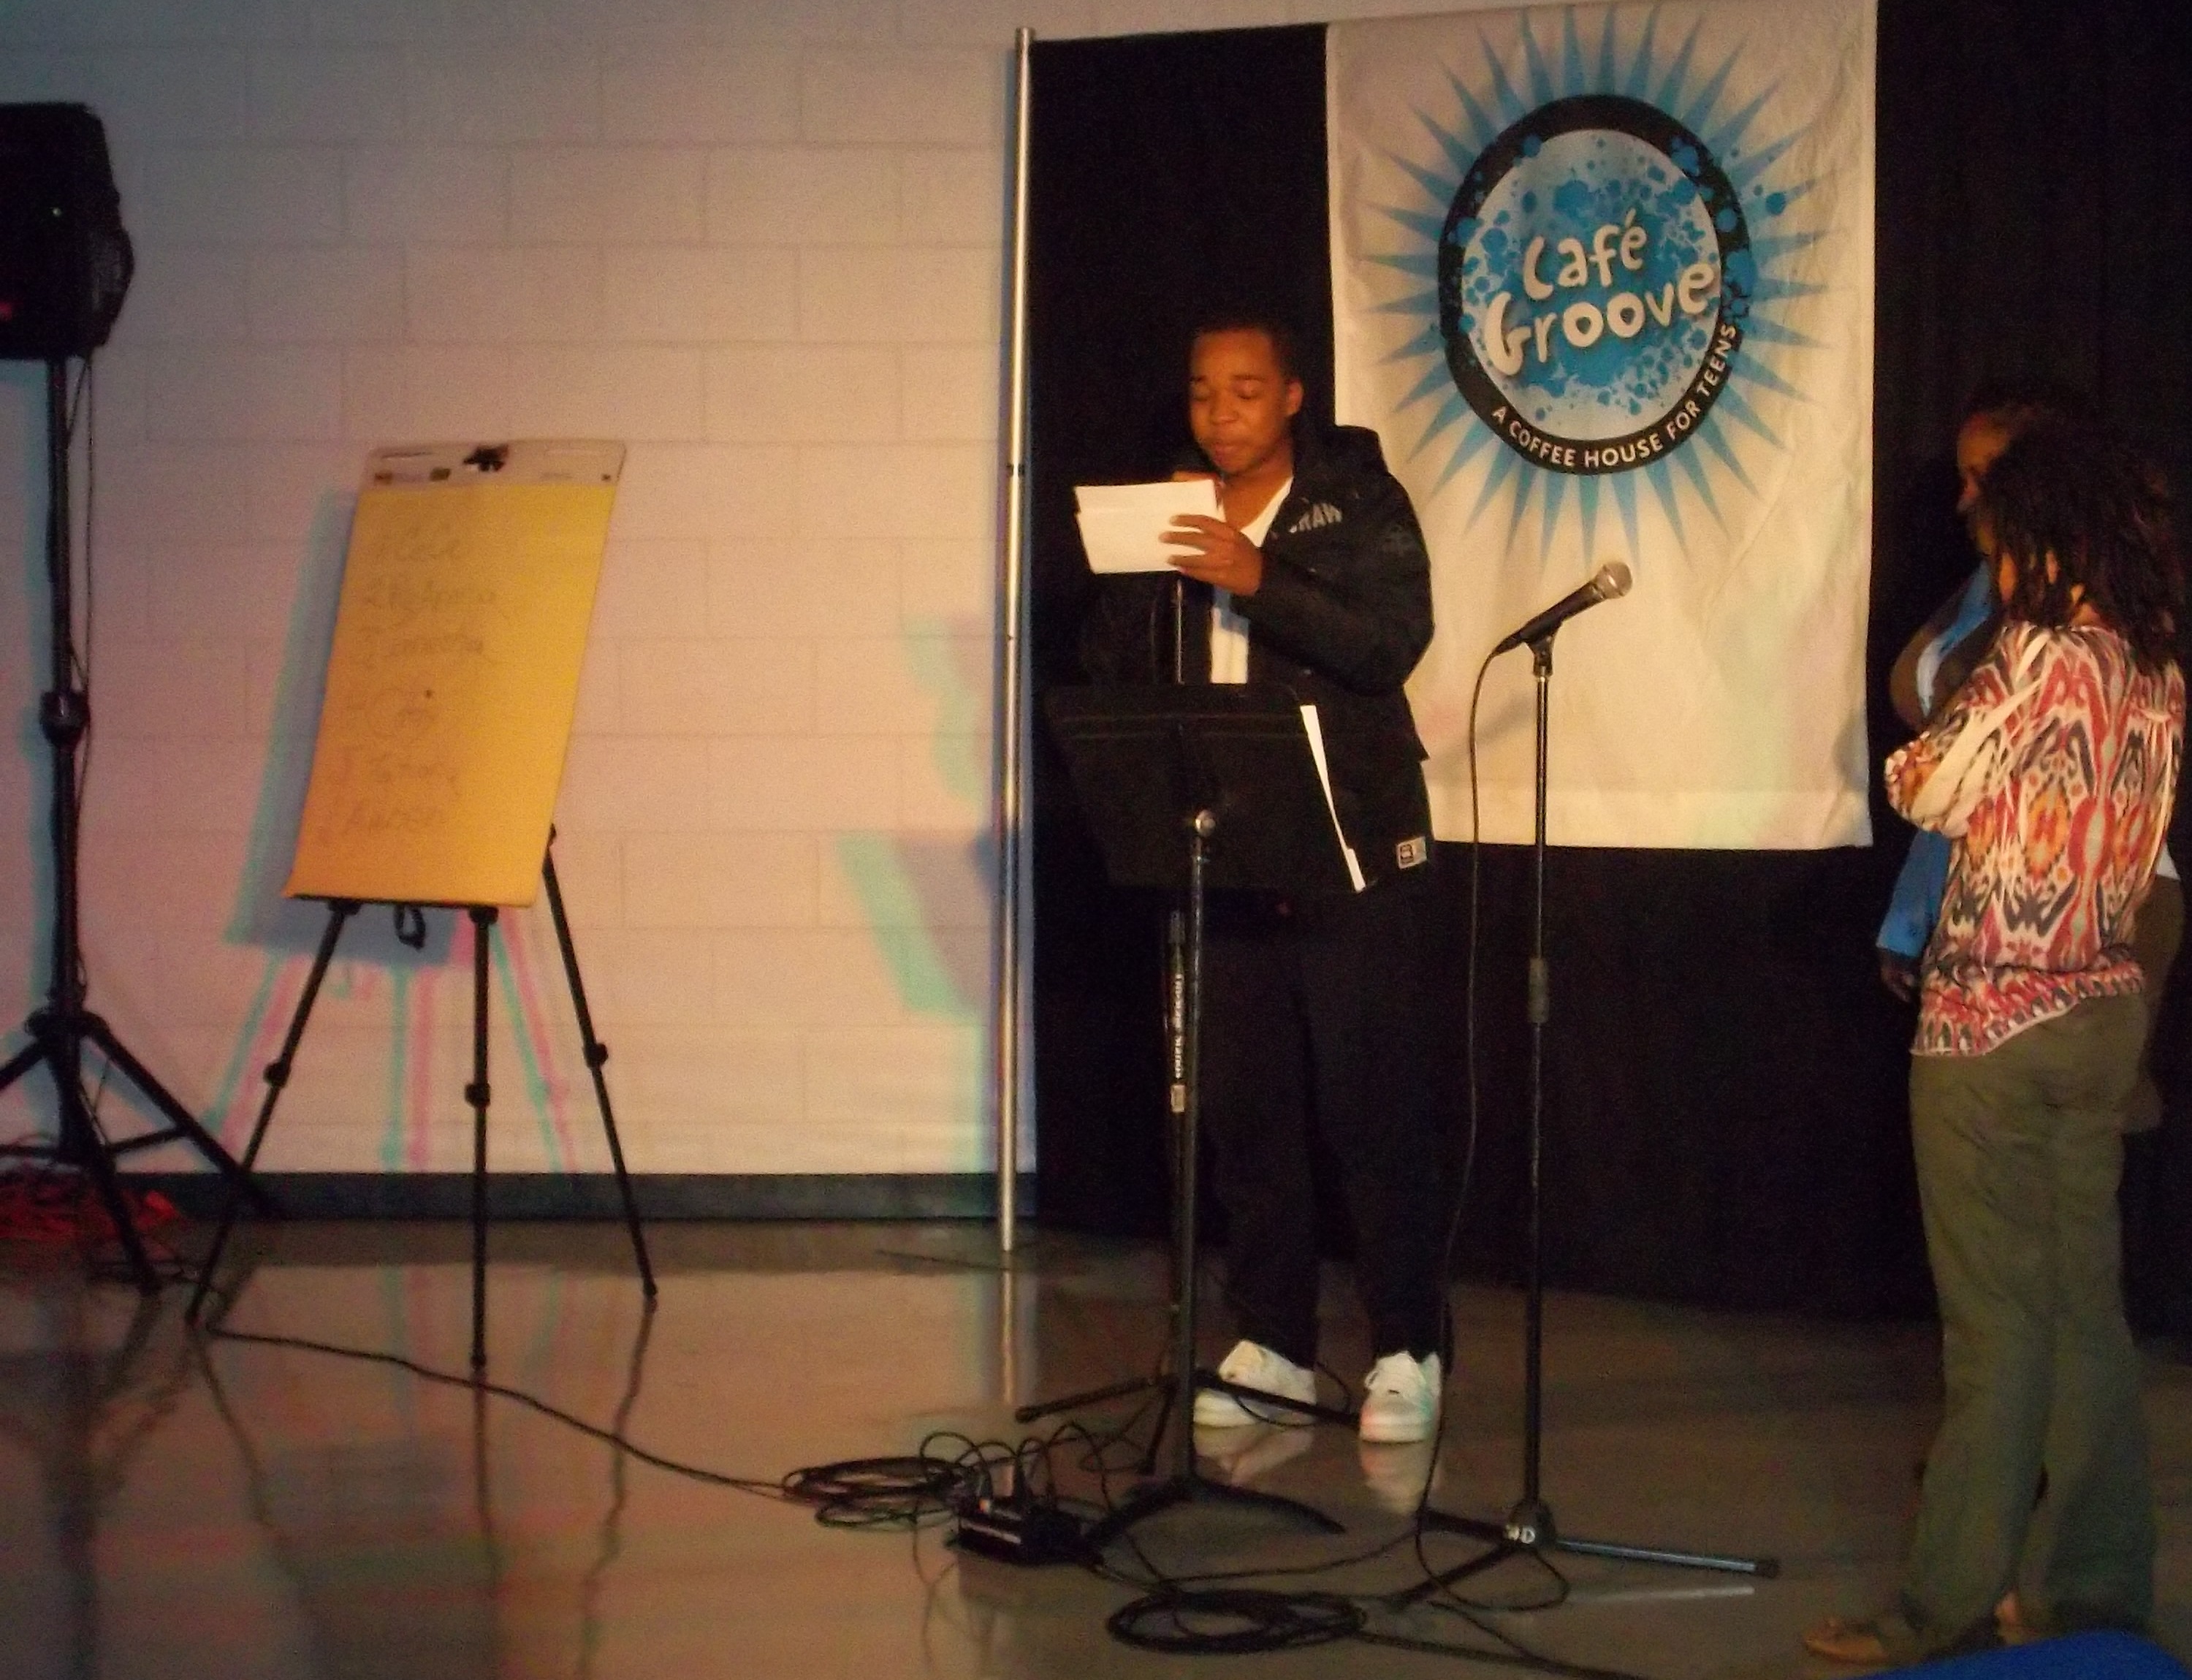 "Time to Let It Out" Cafe Groove Poetry at Temple Hills